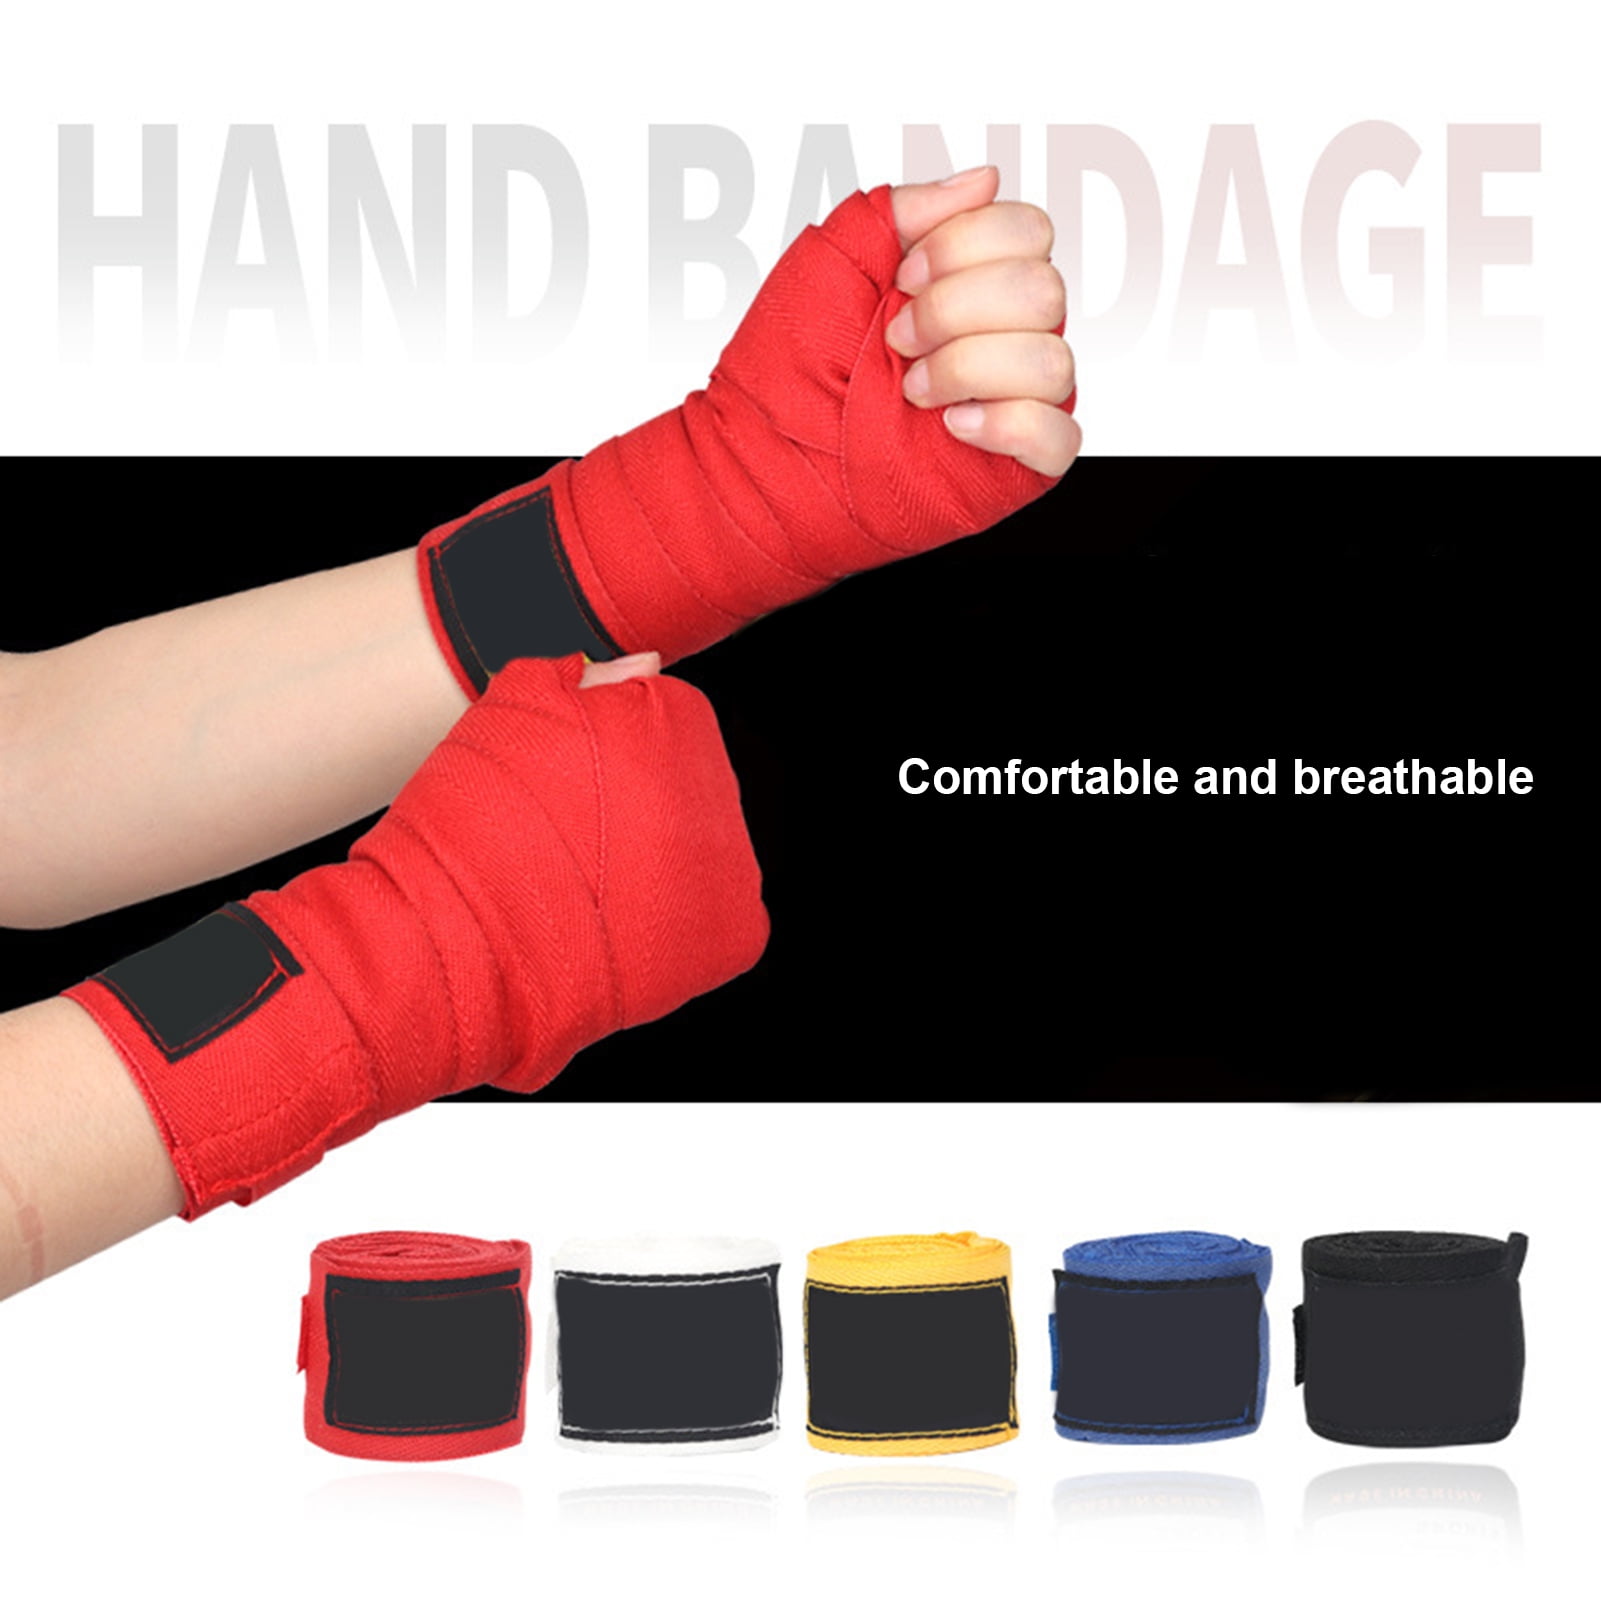 Thumb Loop Cotton Hook Boxing Hand Wraps Glove Fist Bandage Wrist Protector 